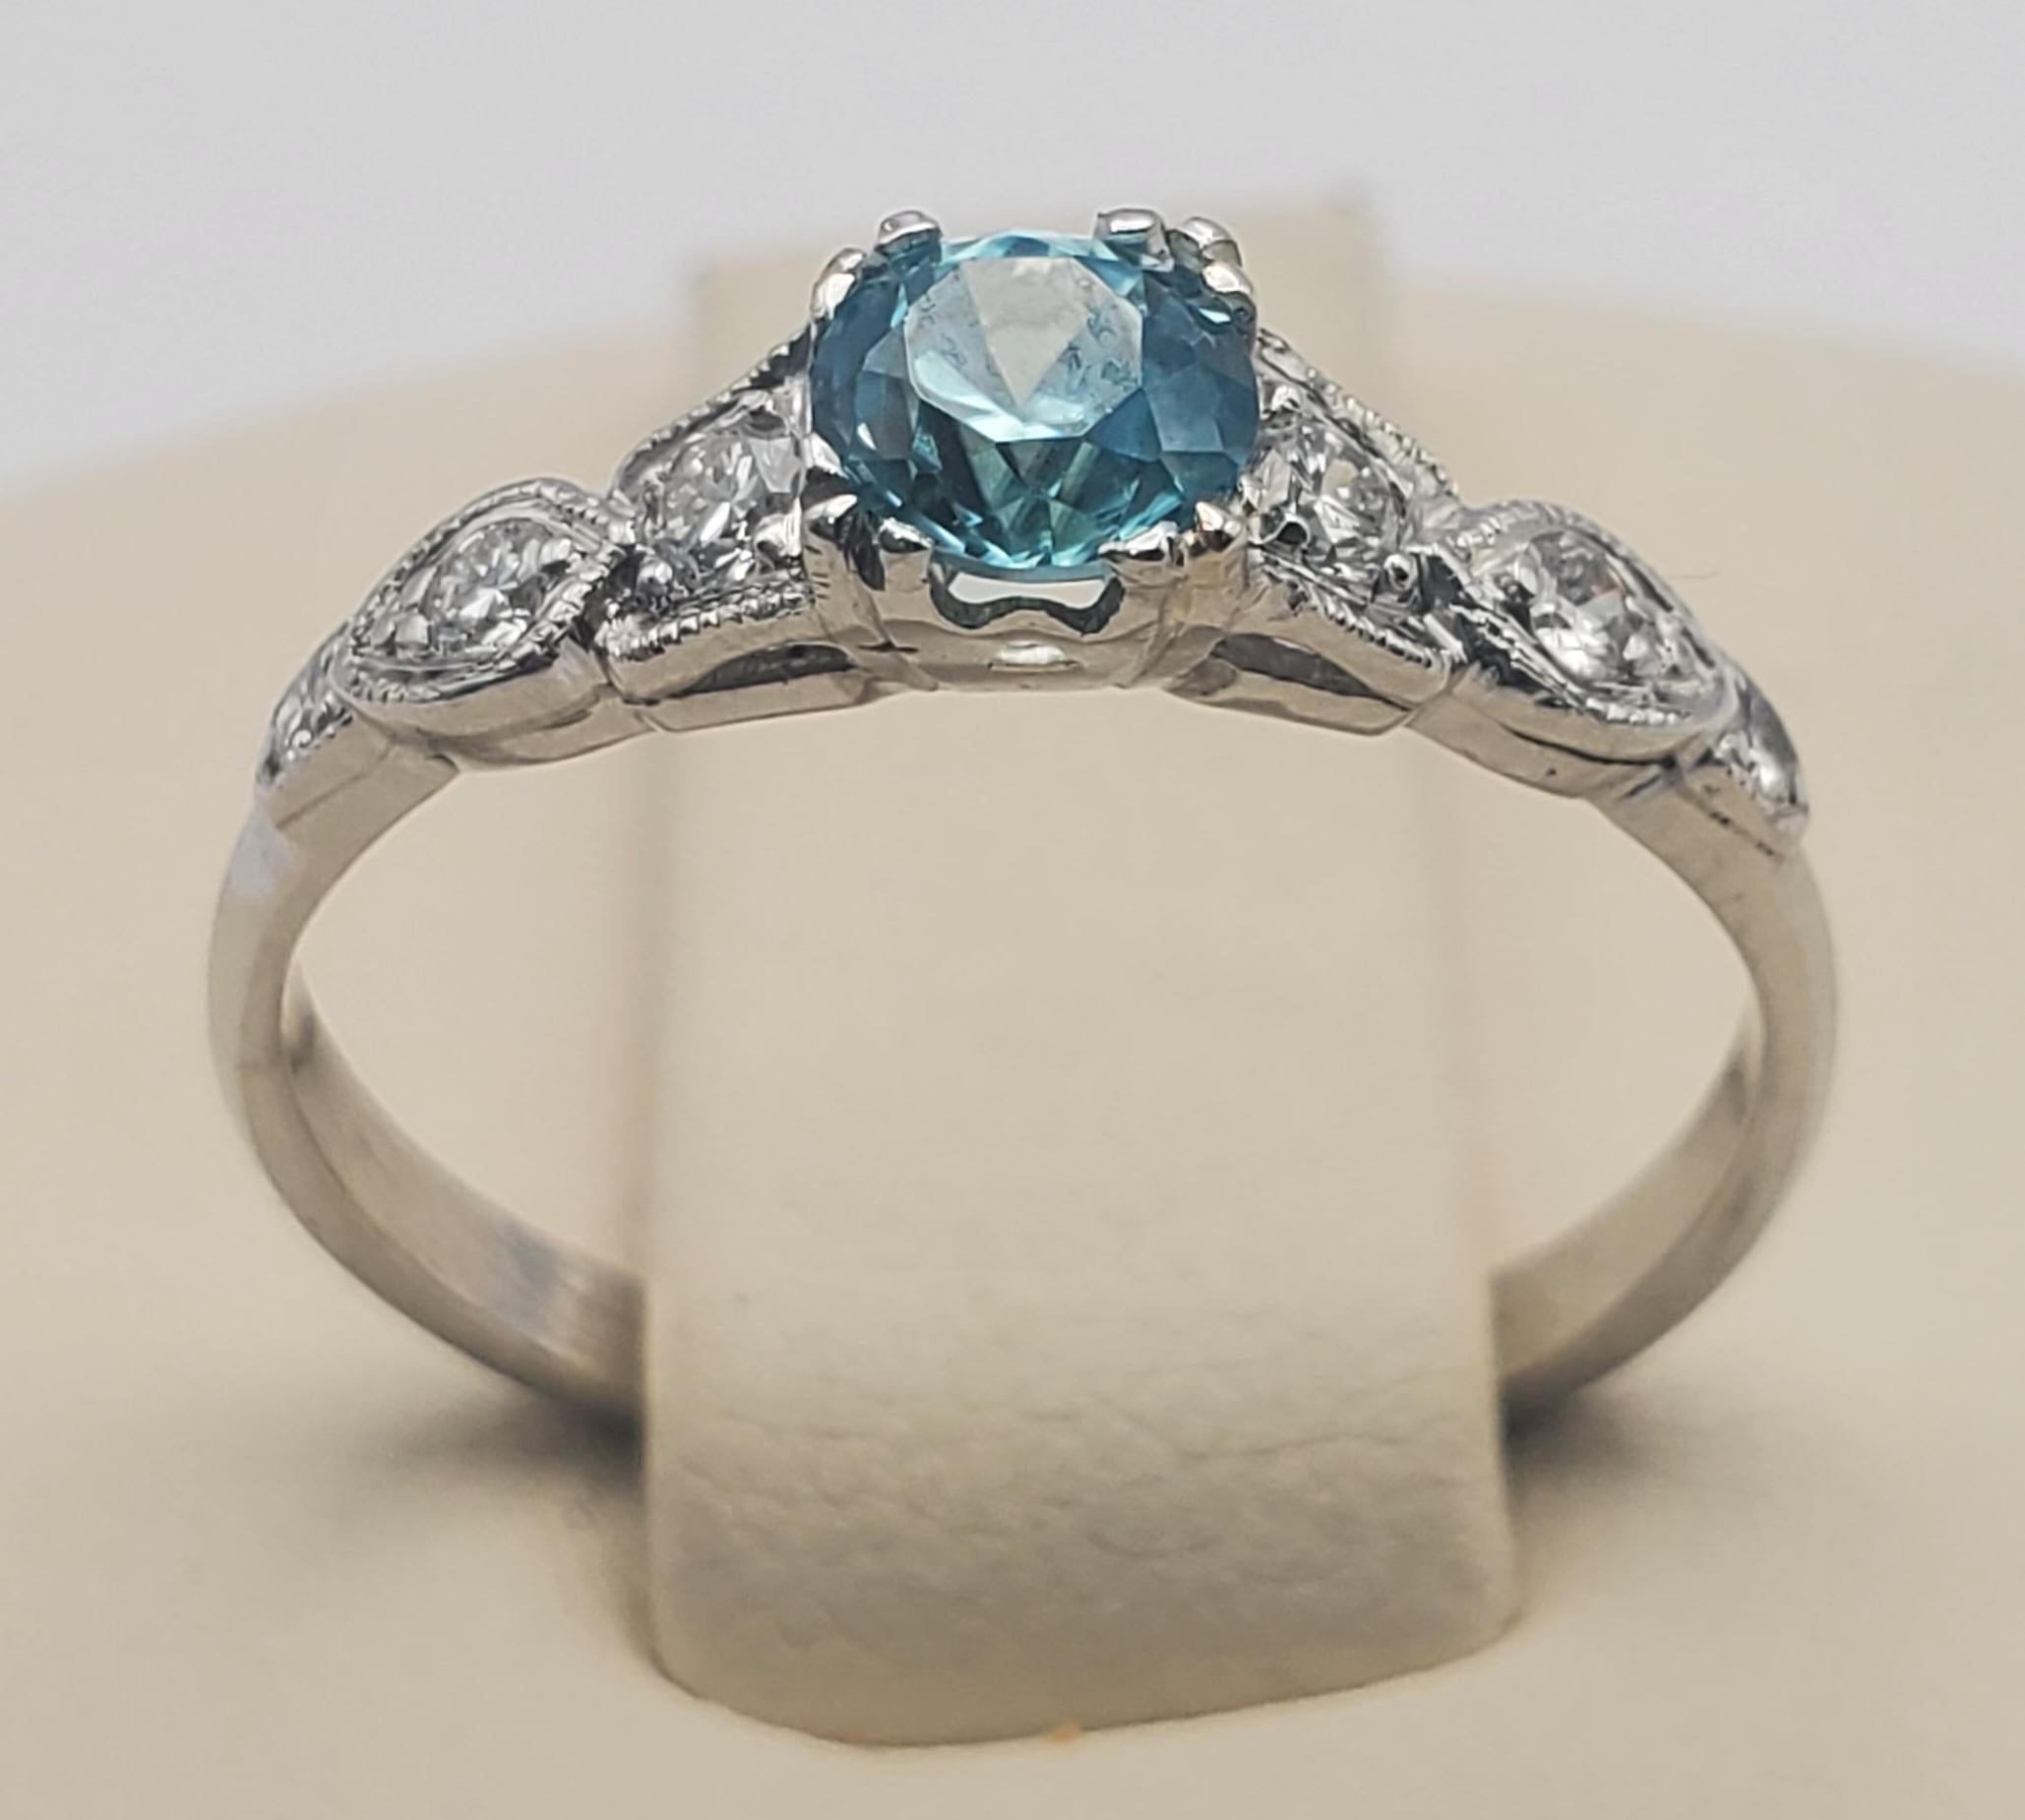 Vibrant 0.73ct Blue Zircon and Diamond Vintage Ring For Sale 3